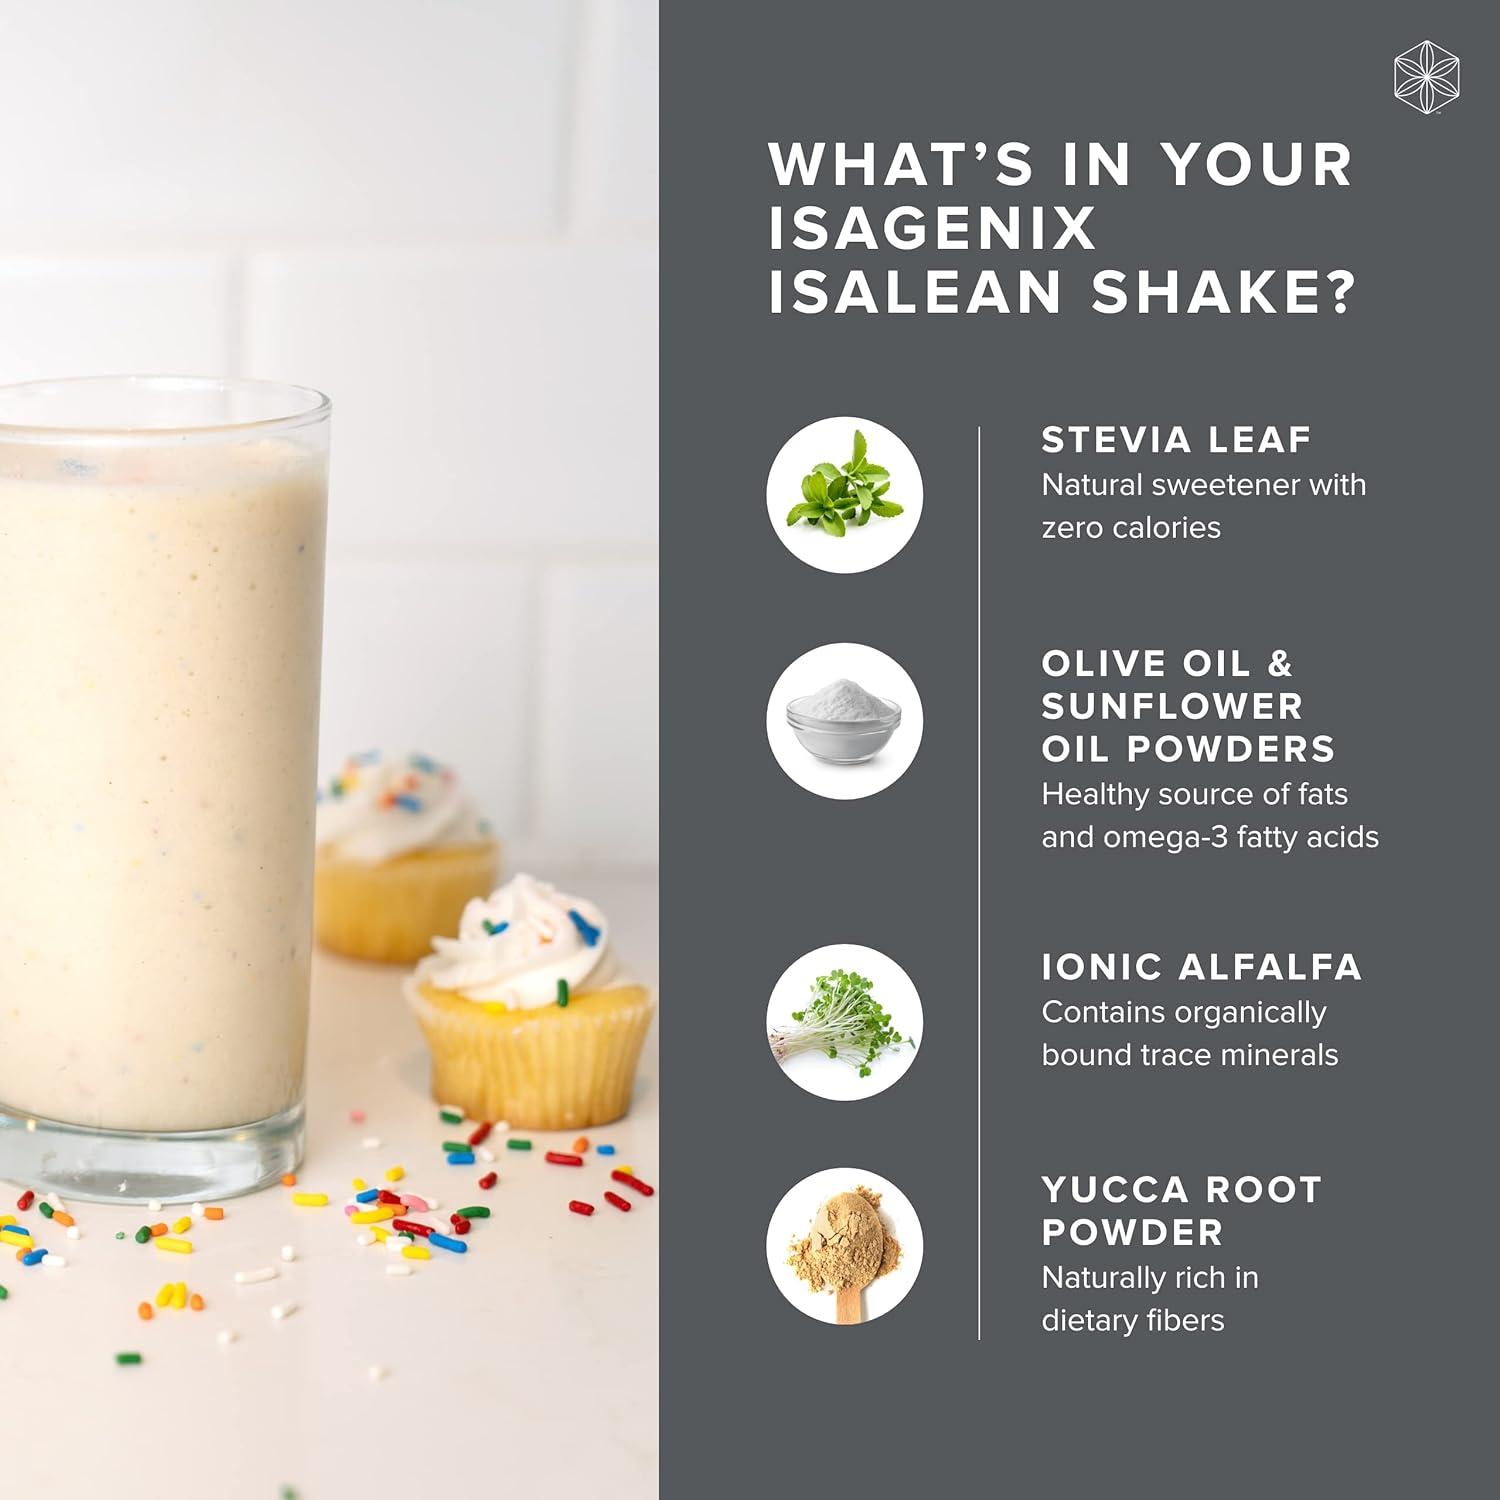 What's in the Isagenix Shake?